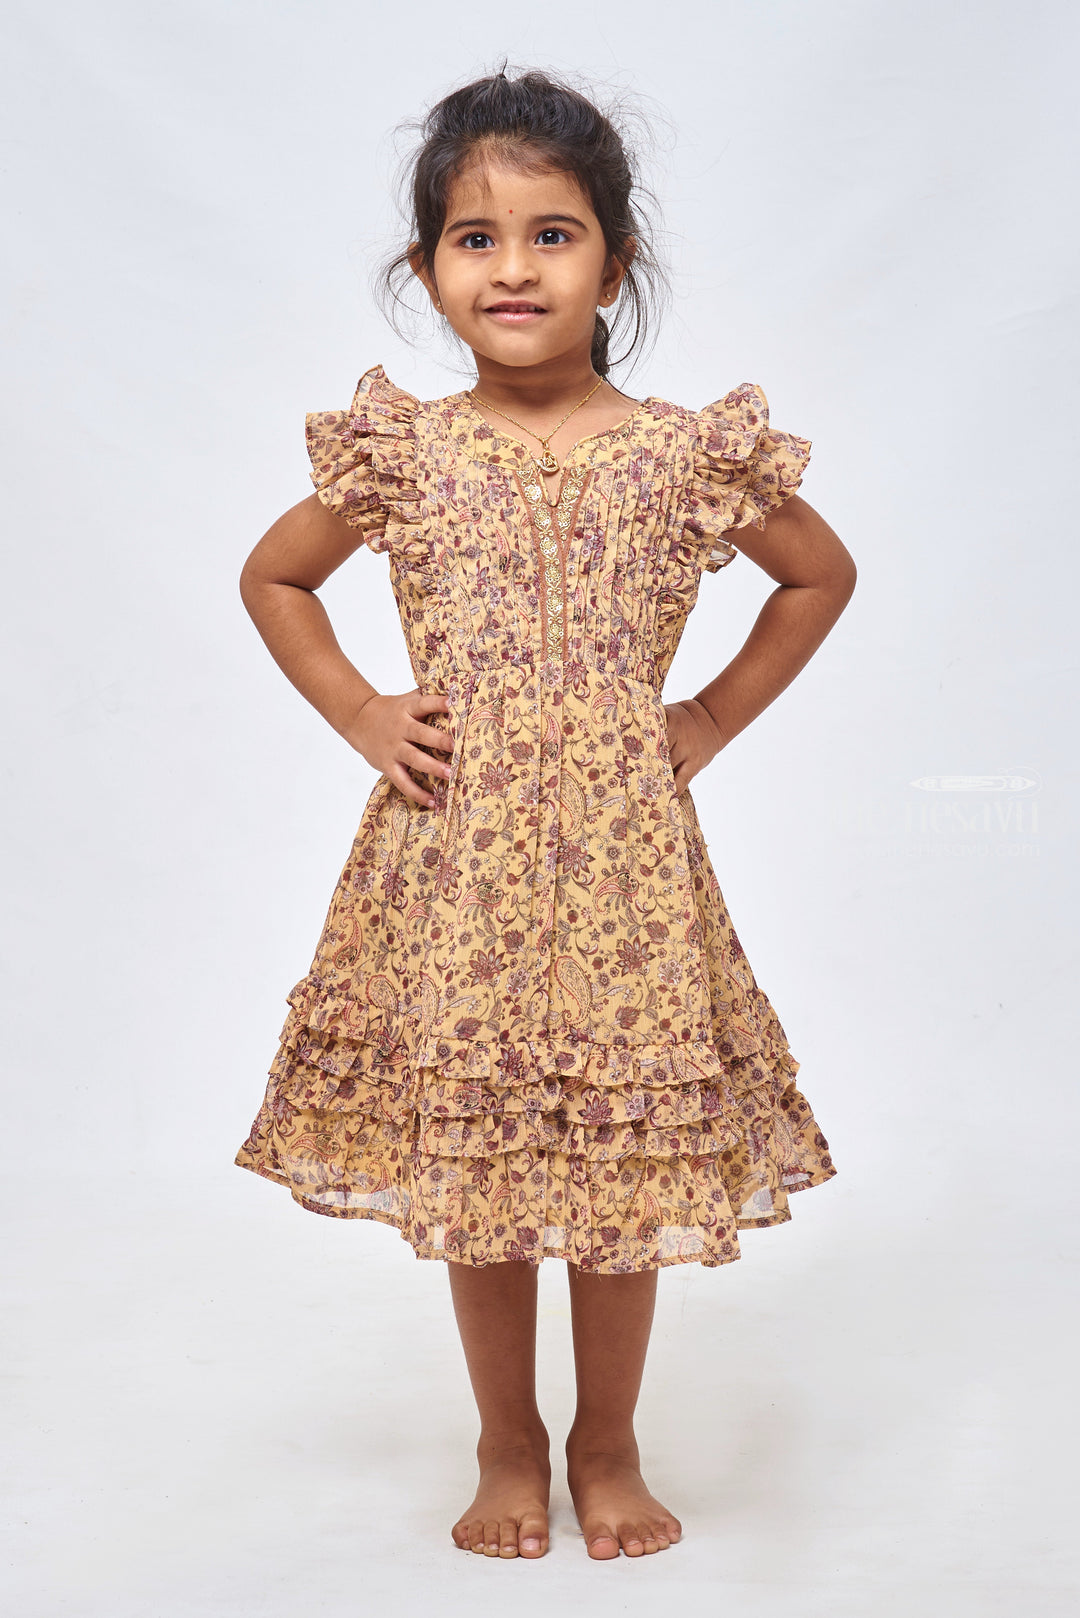 The Nesavu Girls Cotton Frock Yellow Sequin Sunshine: Cotton Frock with Paisley Prints Nesavu 22 (4Y) / Yellow / Georgette GFC1131B-22 Simple Cotton Frock Design for Girls | Baby Frock Cotton | the Nesavu